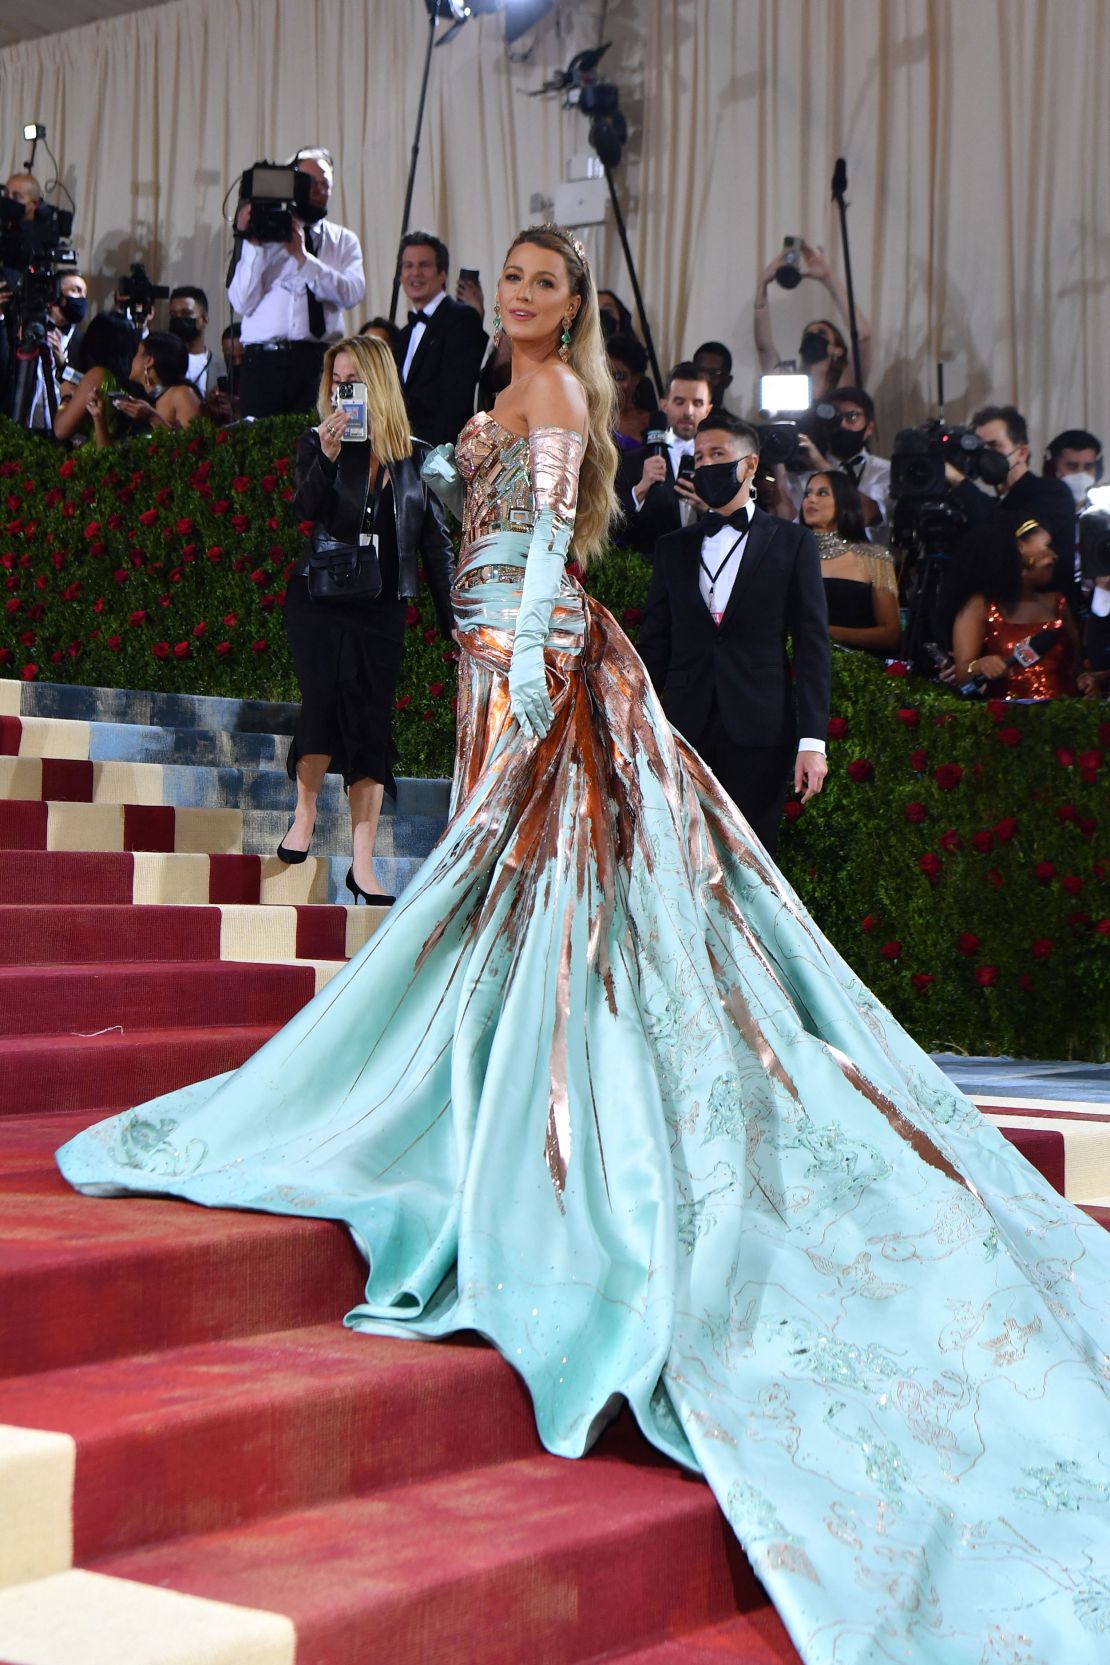 Blake Lively transforms at the Met Gala in architectureinspired